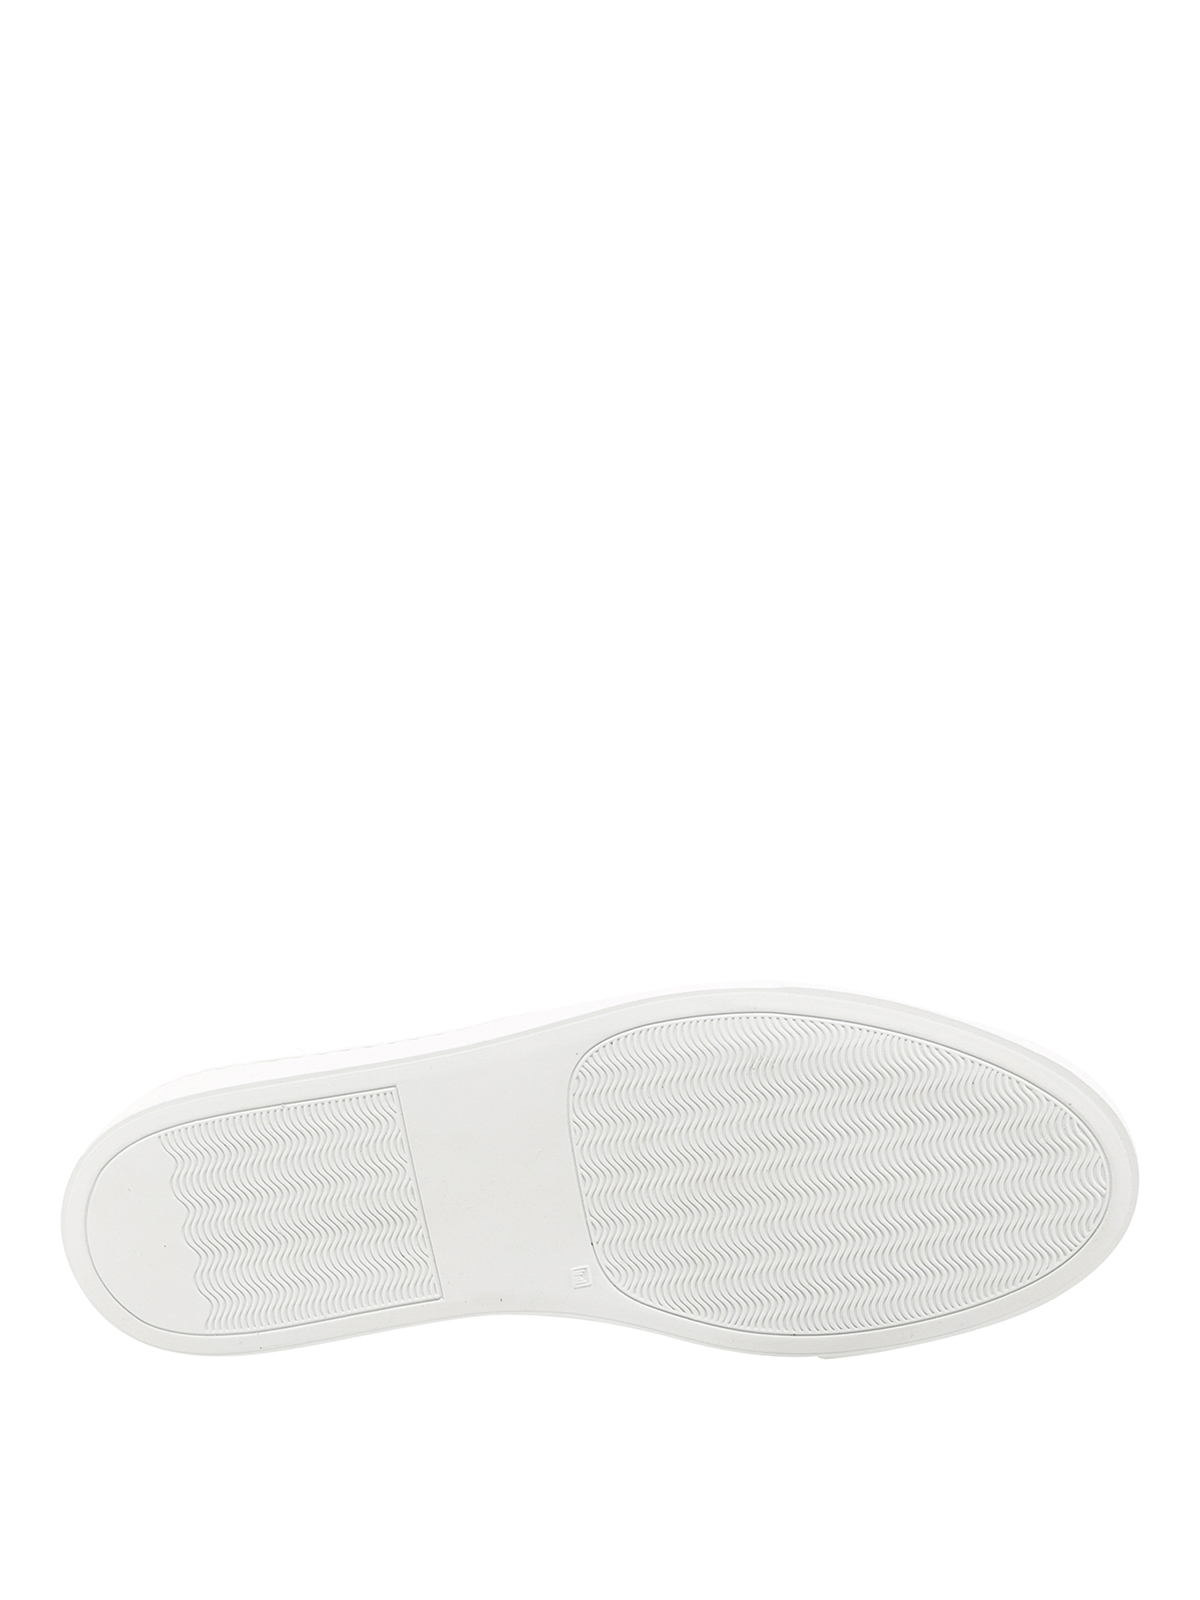 Shop Common Projects Zapatillas - Bball In Blanco